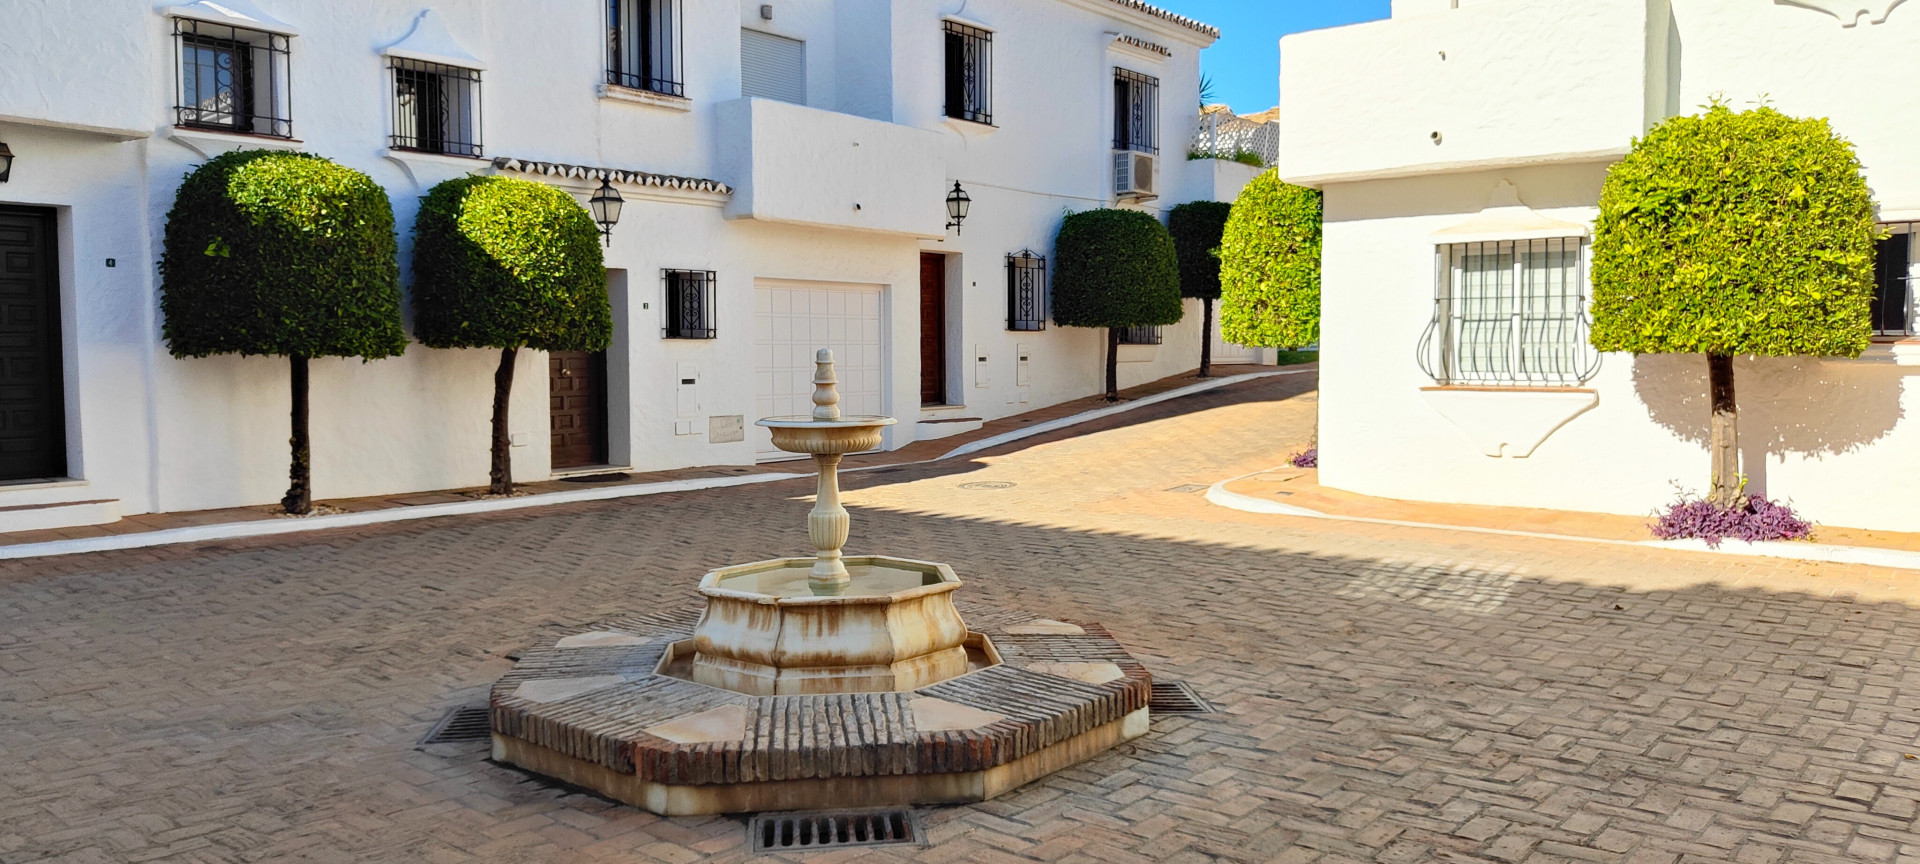 Completely renovated townhouse with private garden in Los Naranjos